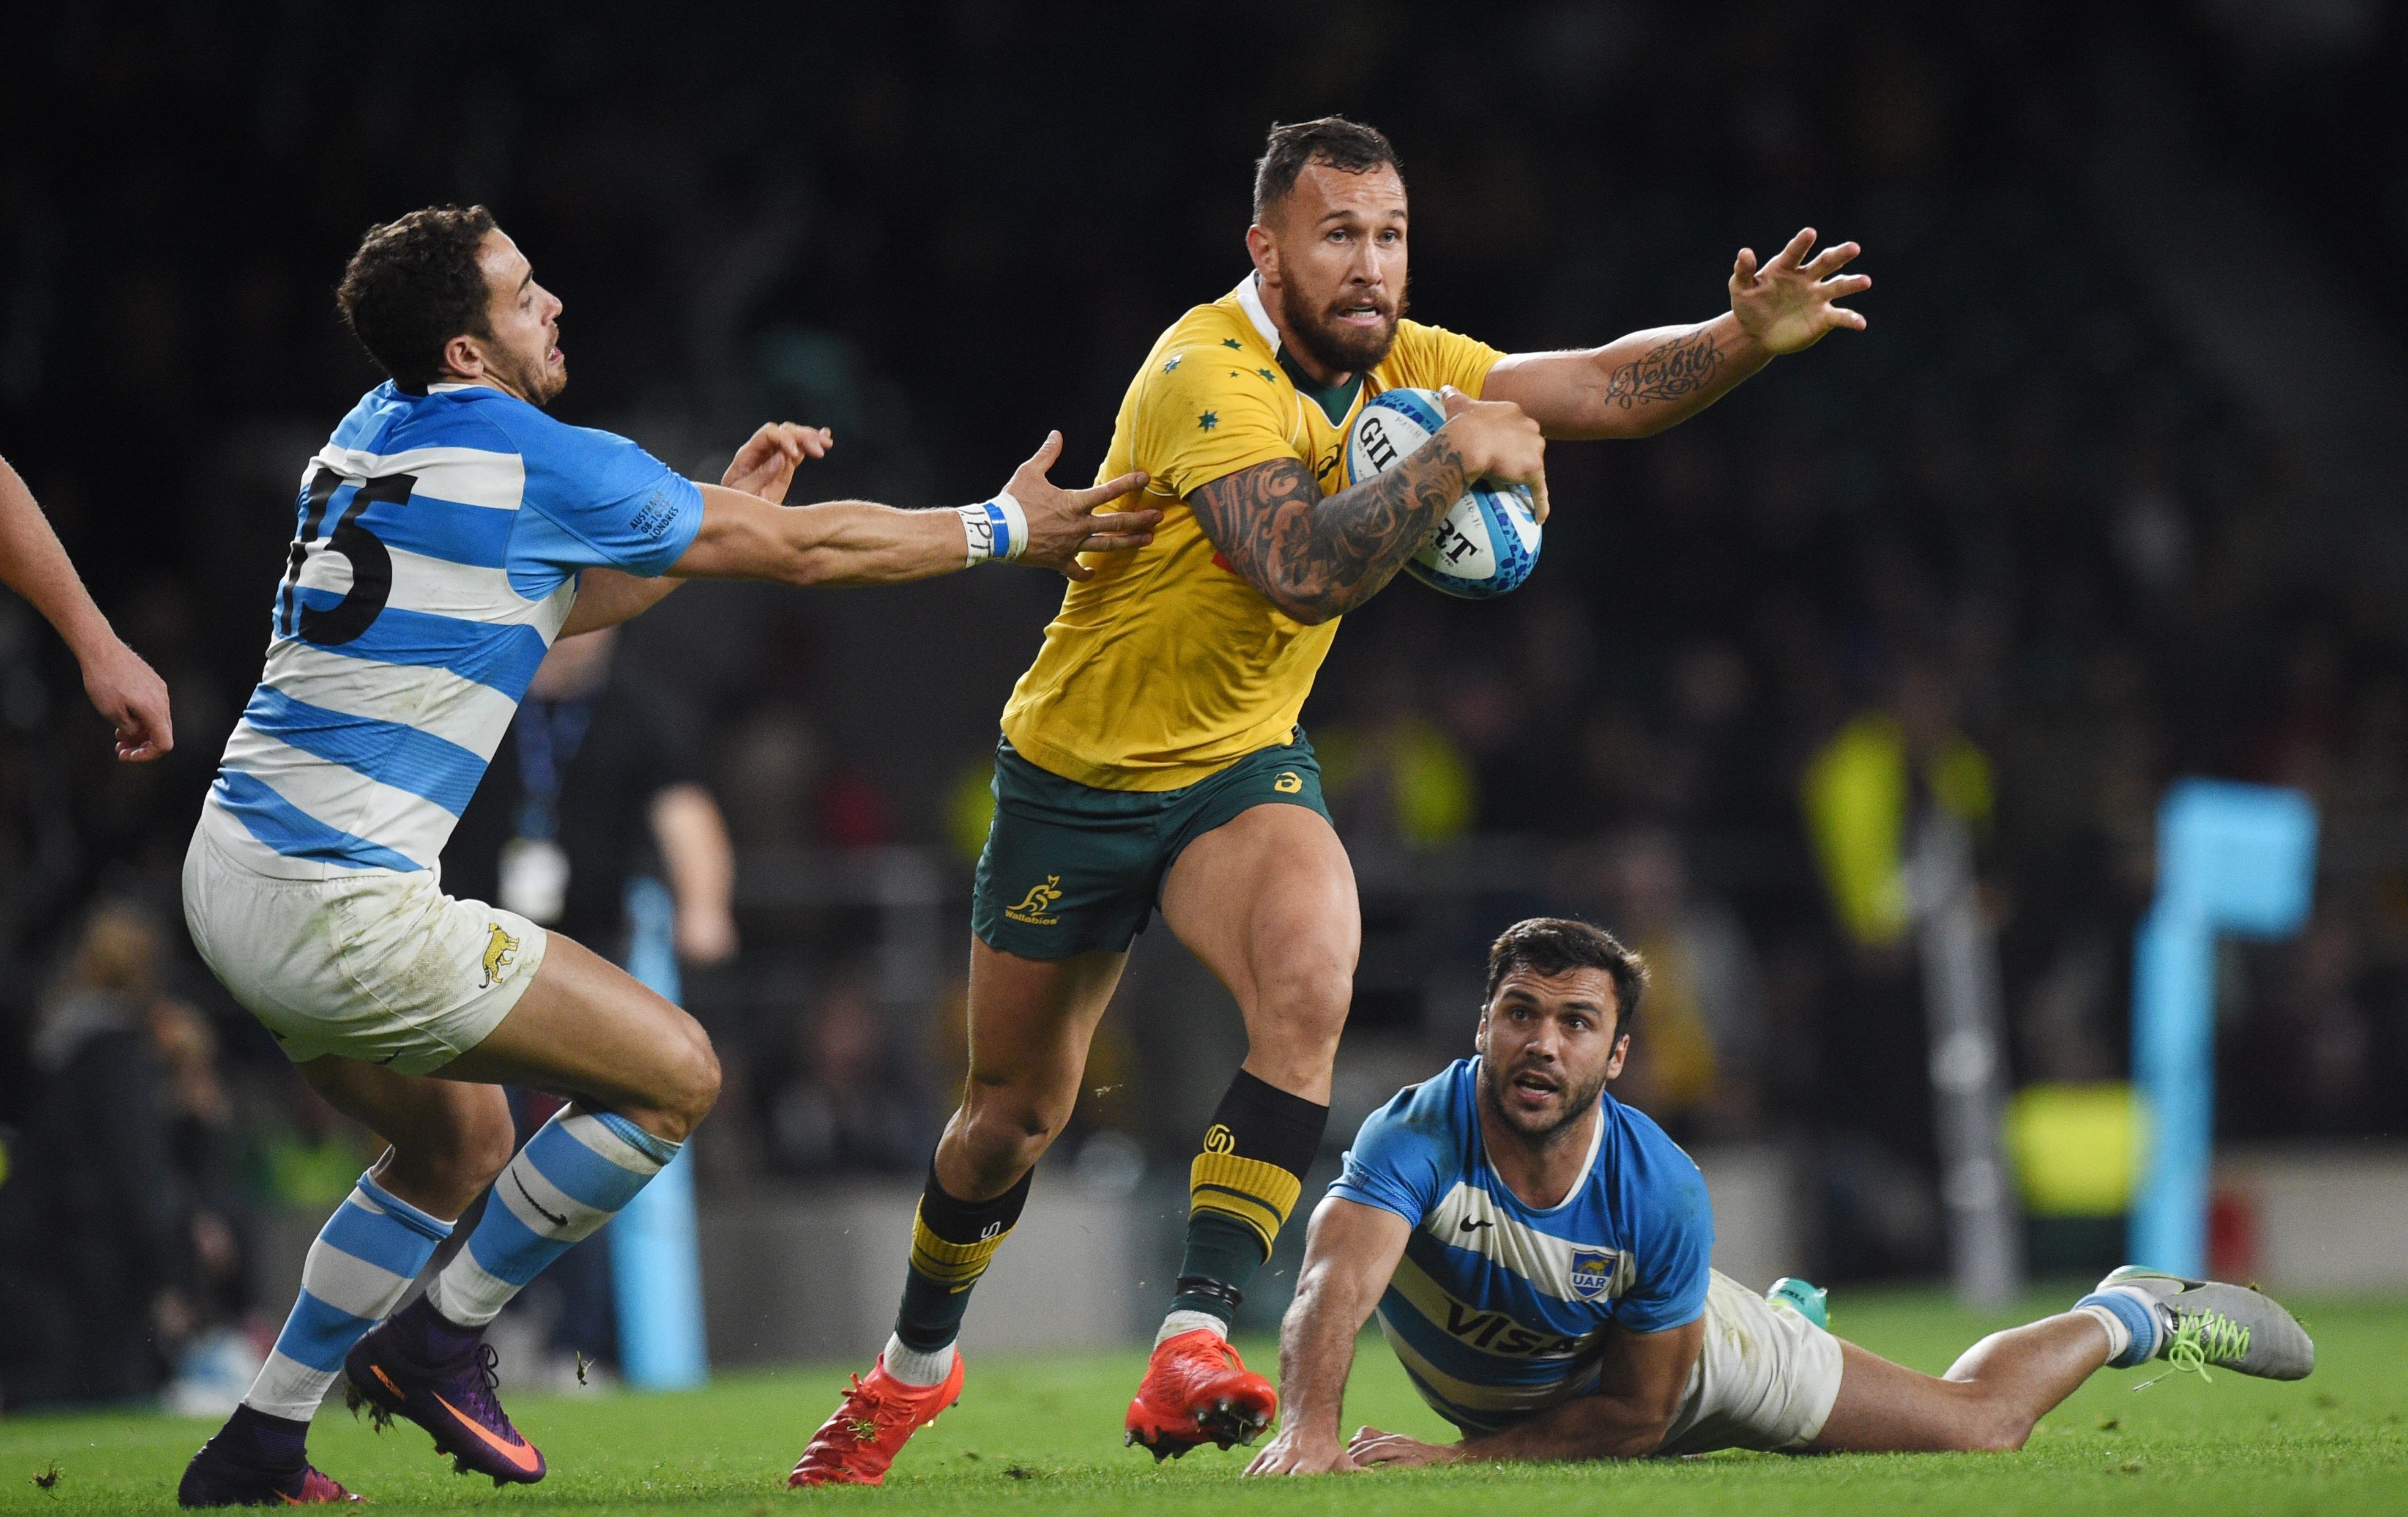 Quade Cooper is looking forward to showing his attacking flair for the Barbarians against the Wallabies. Photo: EPA